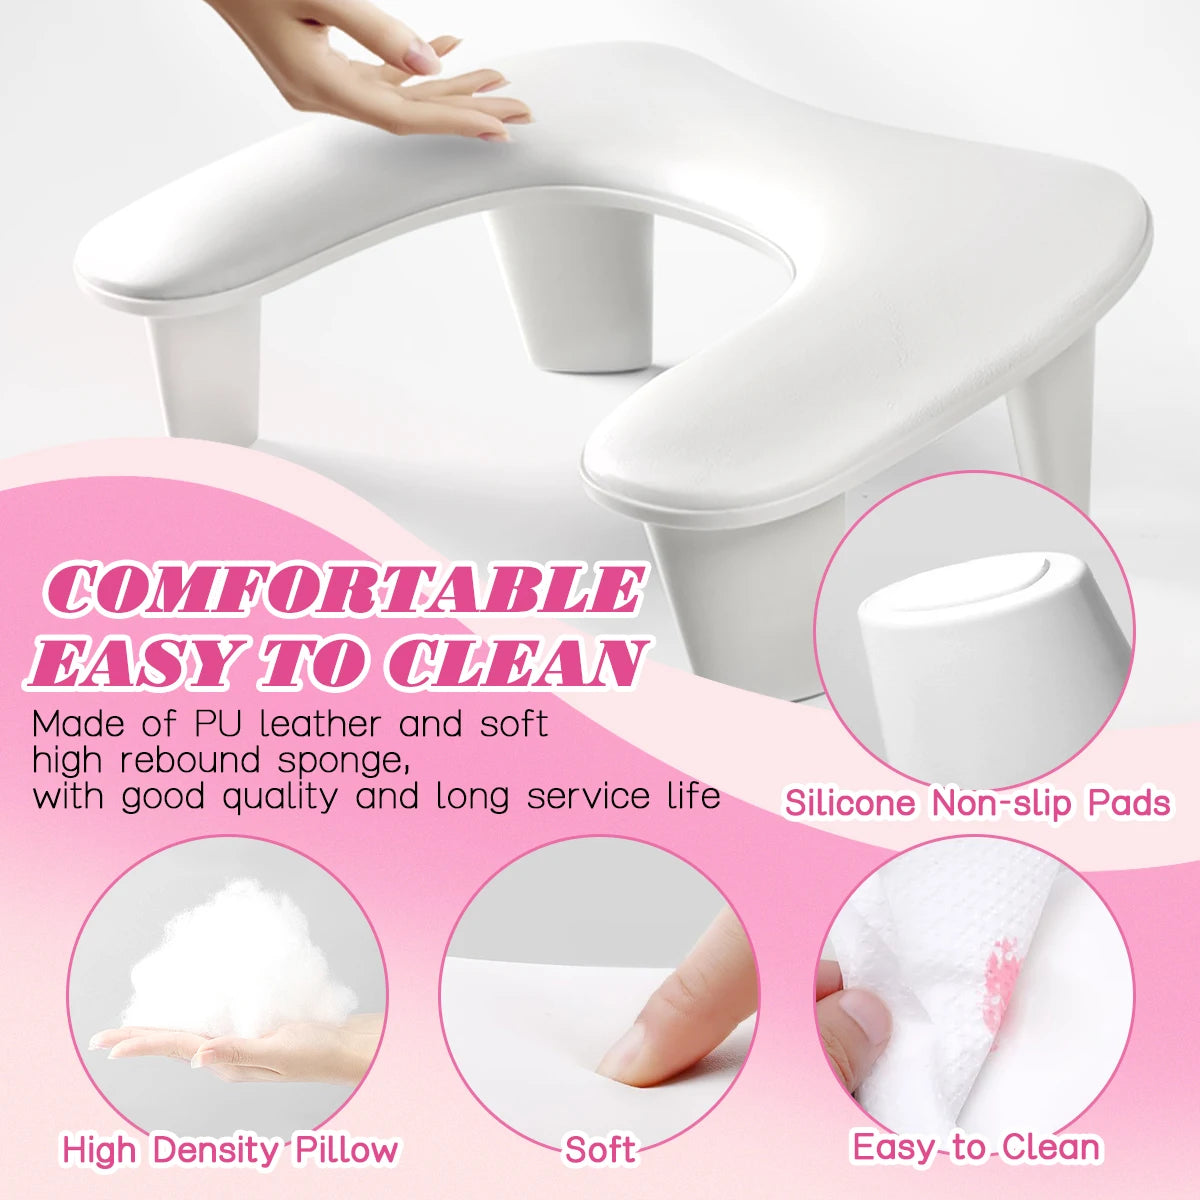 Two Hands Nail Art Hand Pillow Portable Removable Stand Tilt Design Manicure Stand Hand Pillow PU Material Hand Pillow Cushion